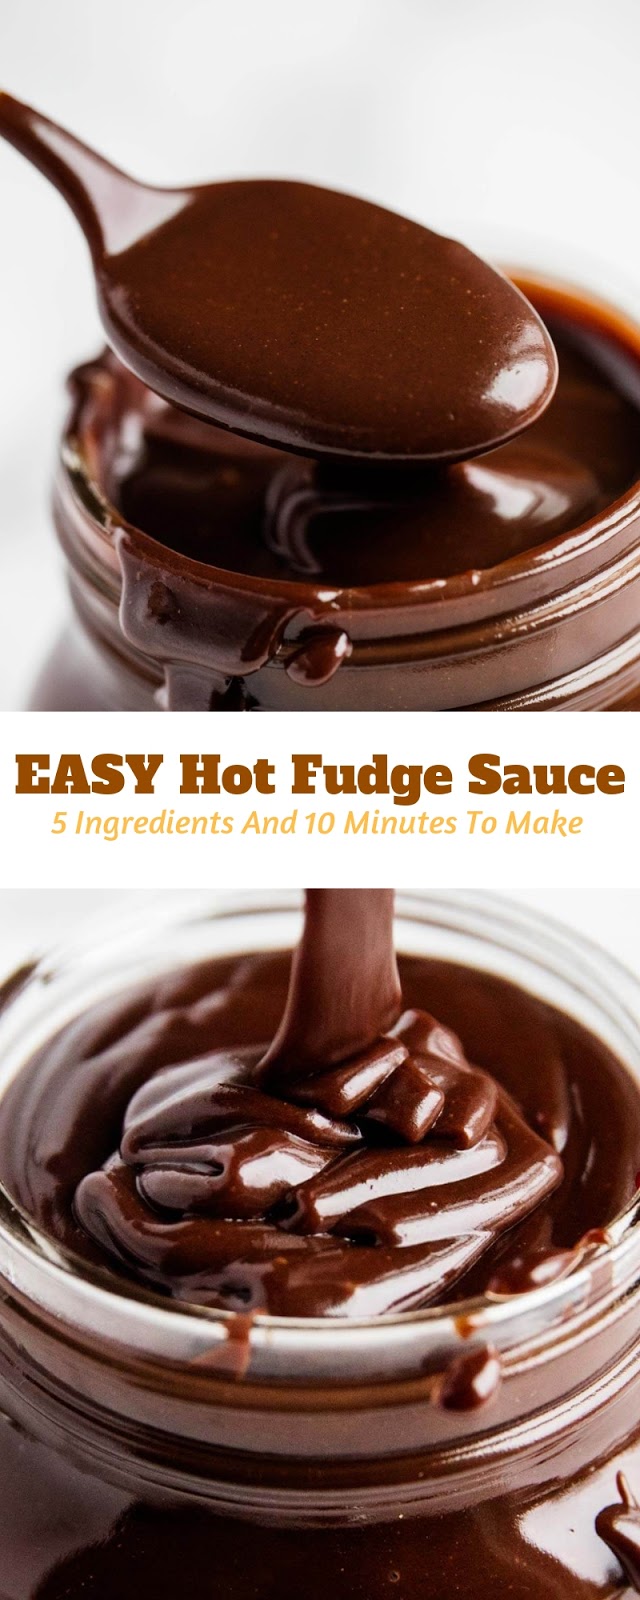 EASY Hot Fudge Sauce, 5 Ingredients And 10 Minutes To Make | Salty ...